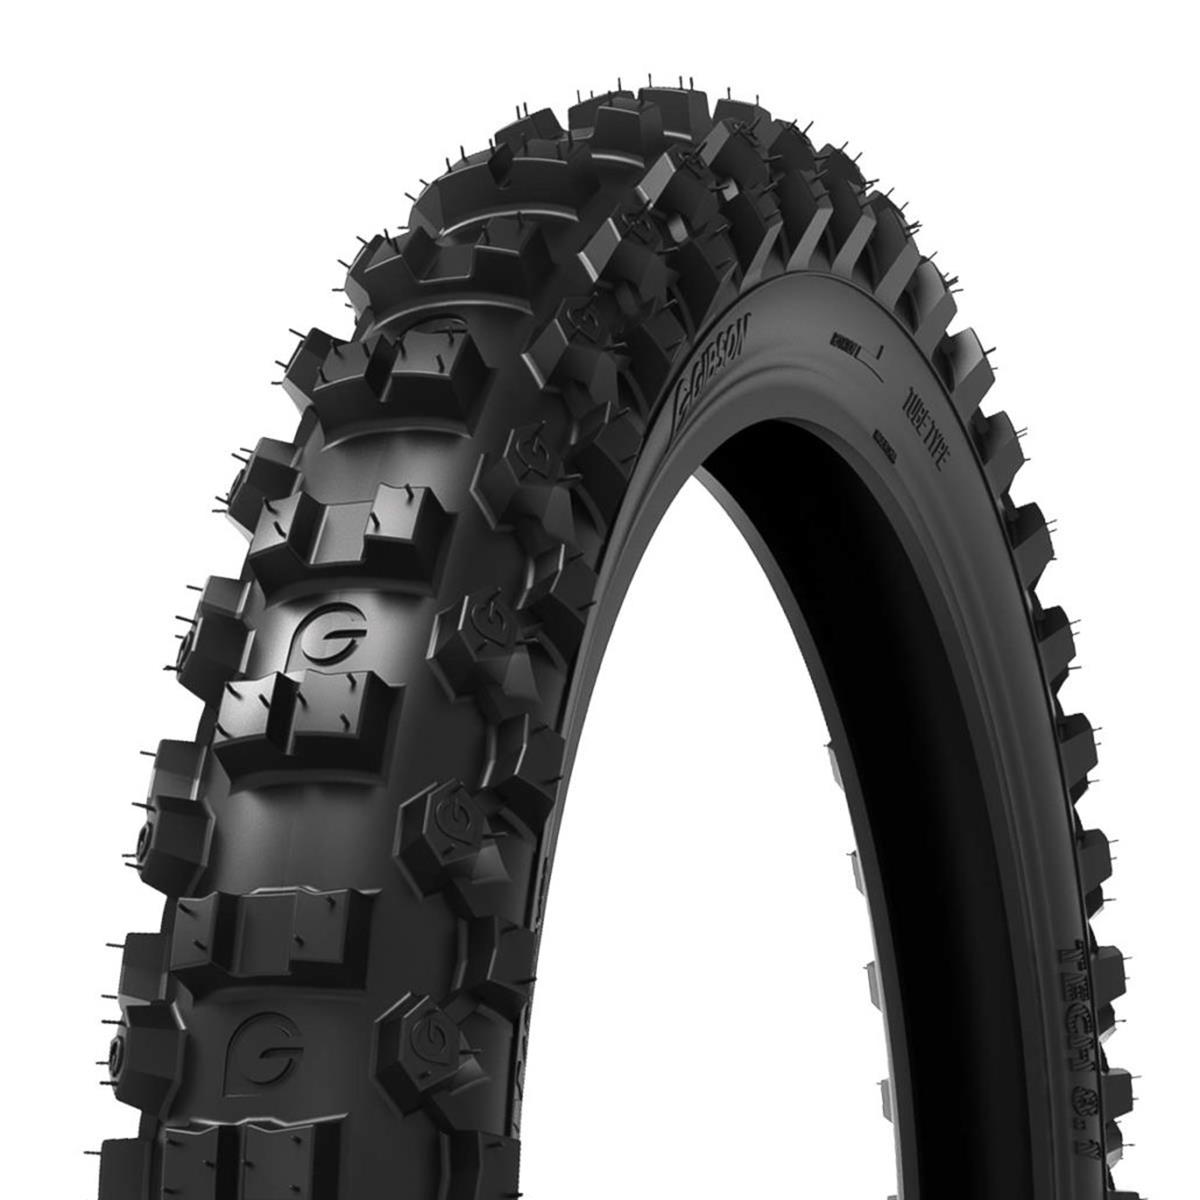 Gibson Front Tire Tech 8.1 90/90-21, FIM licensed